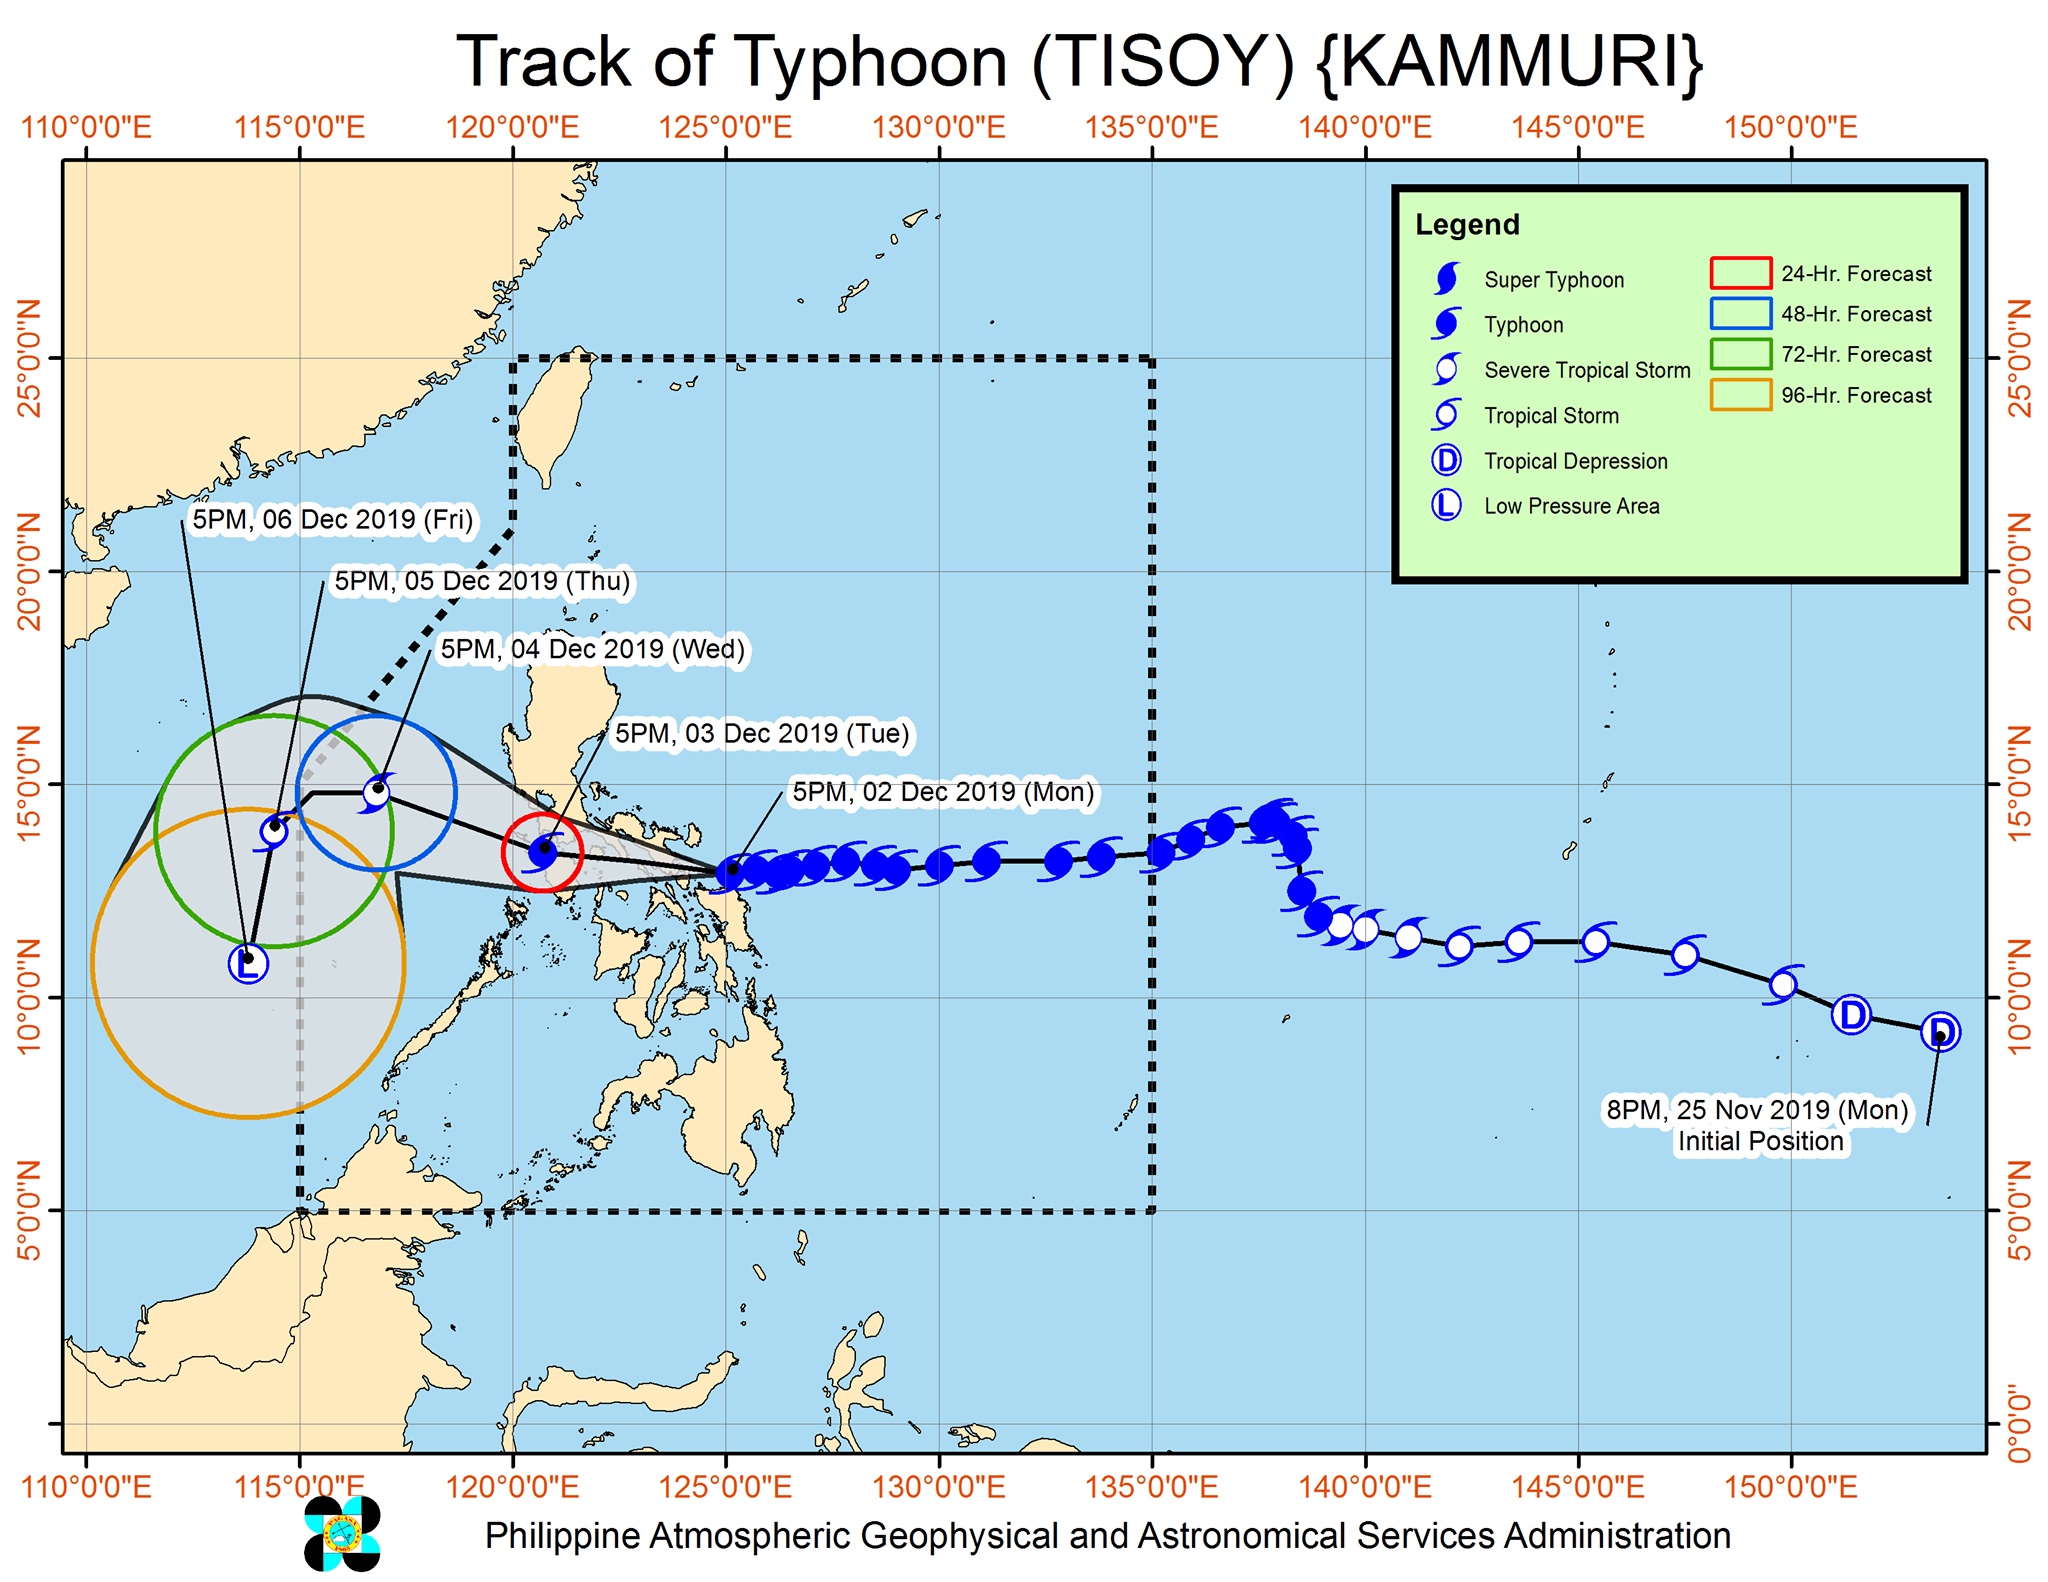 Forecast track of Typhoon Tisoy (Kammuri) as of December 2, 2019, 8 pm. Image from PAGASA 